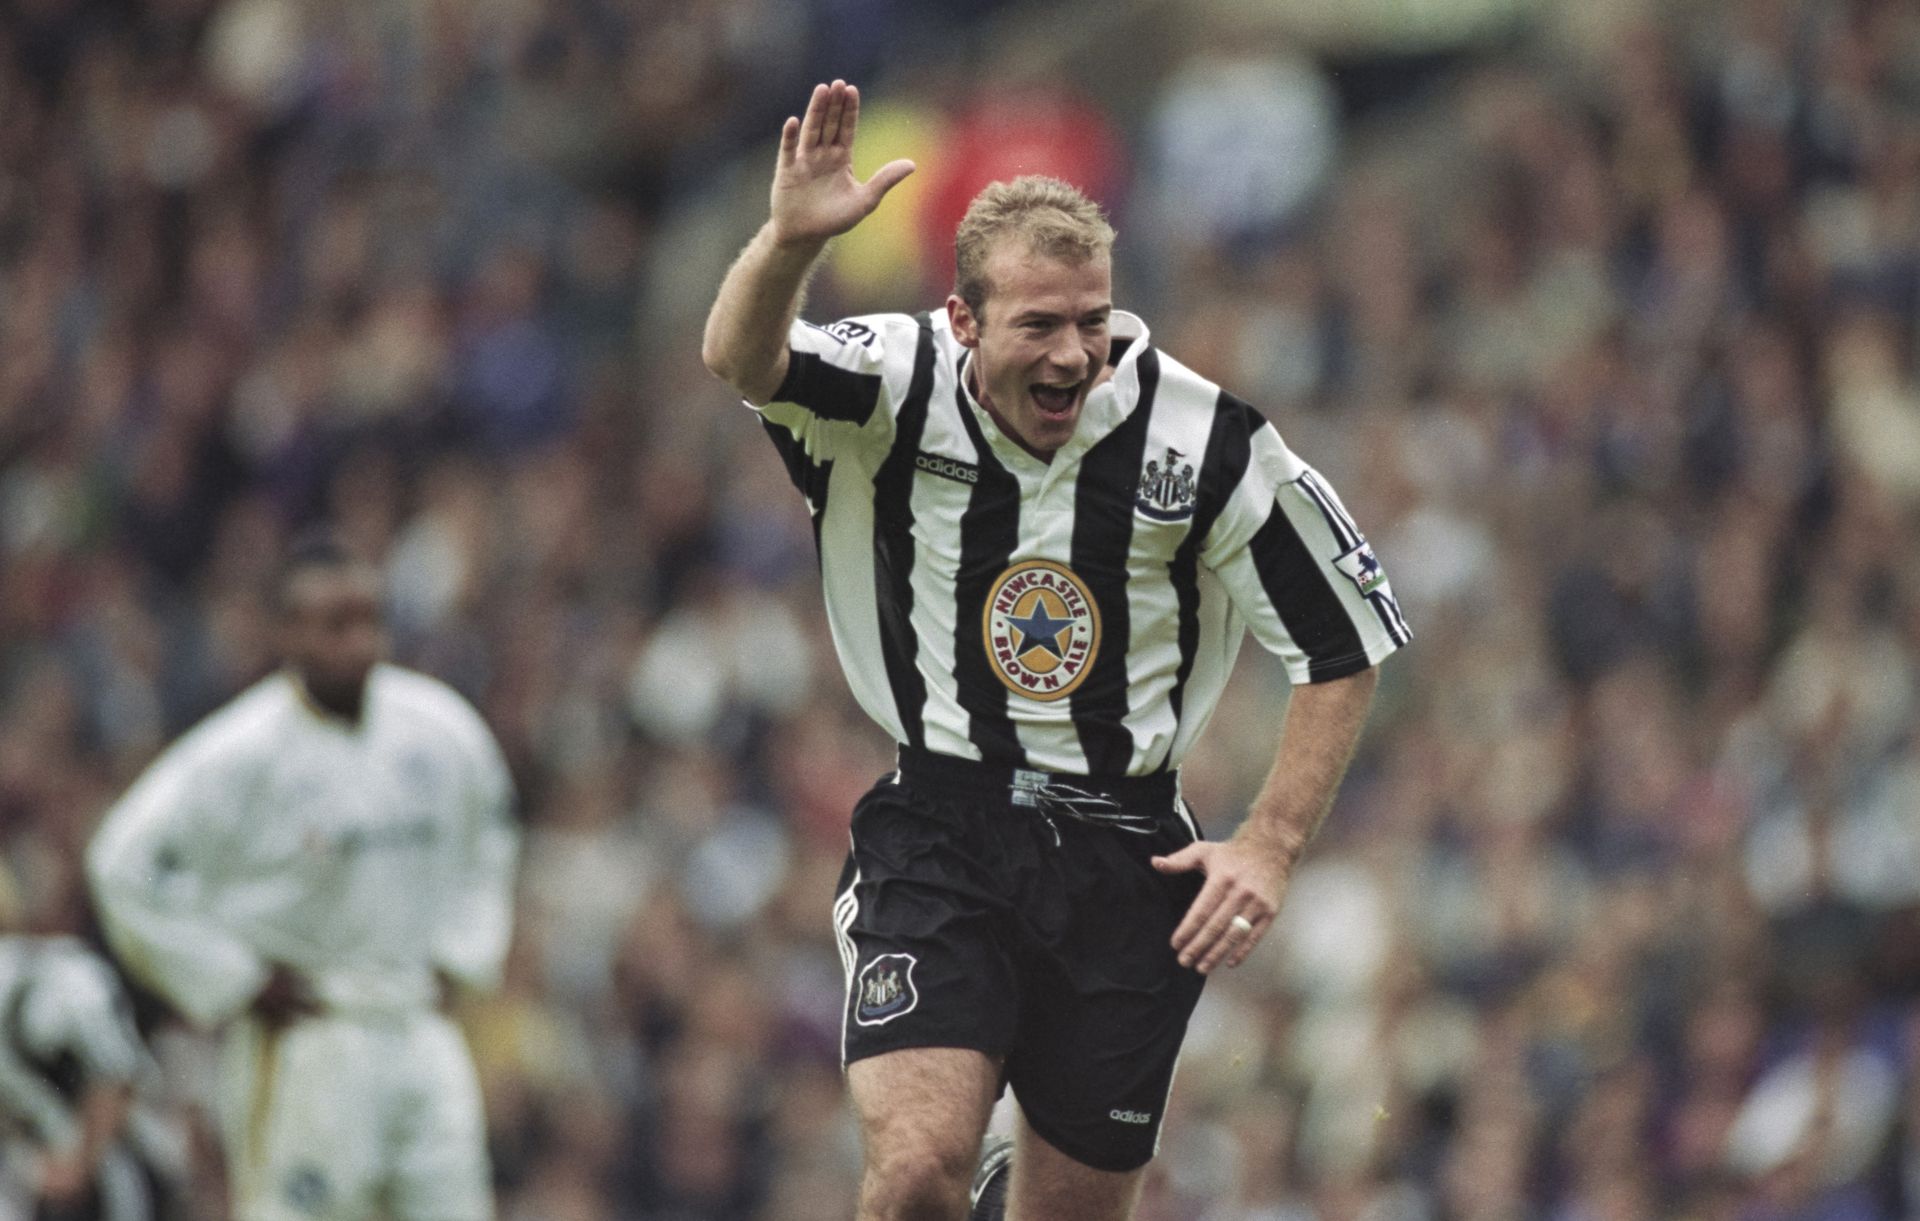 <p>                     Alan Shearer became the world's most expensive player when he left Blackburn Rovers for hometown club Newcastle United in the summer of 1996.                   </p>                                      <p>                     The England striker was signed by the Magpies for a fee of £15 million (around €18m) and went on to become a legend at St. James' Park, despite not winning any silverware. Shearer scored 206 goals in 405 games for Newcastle in 10 seasons at the club before retiring in 2006.                   </p>